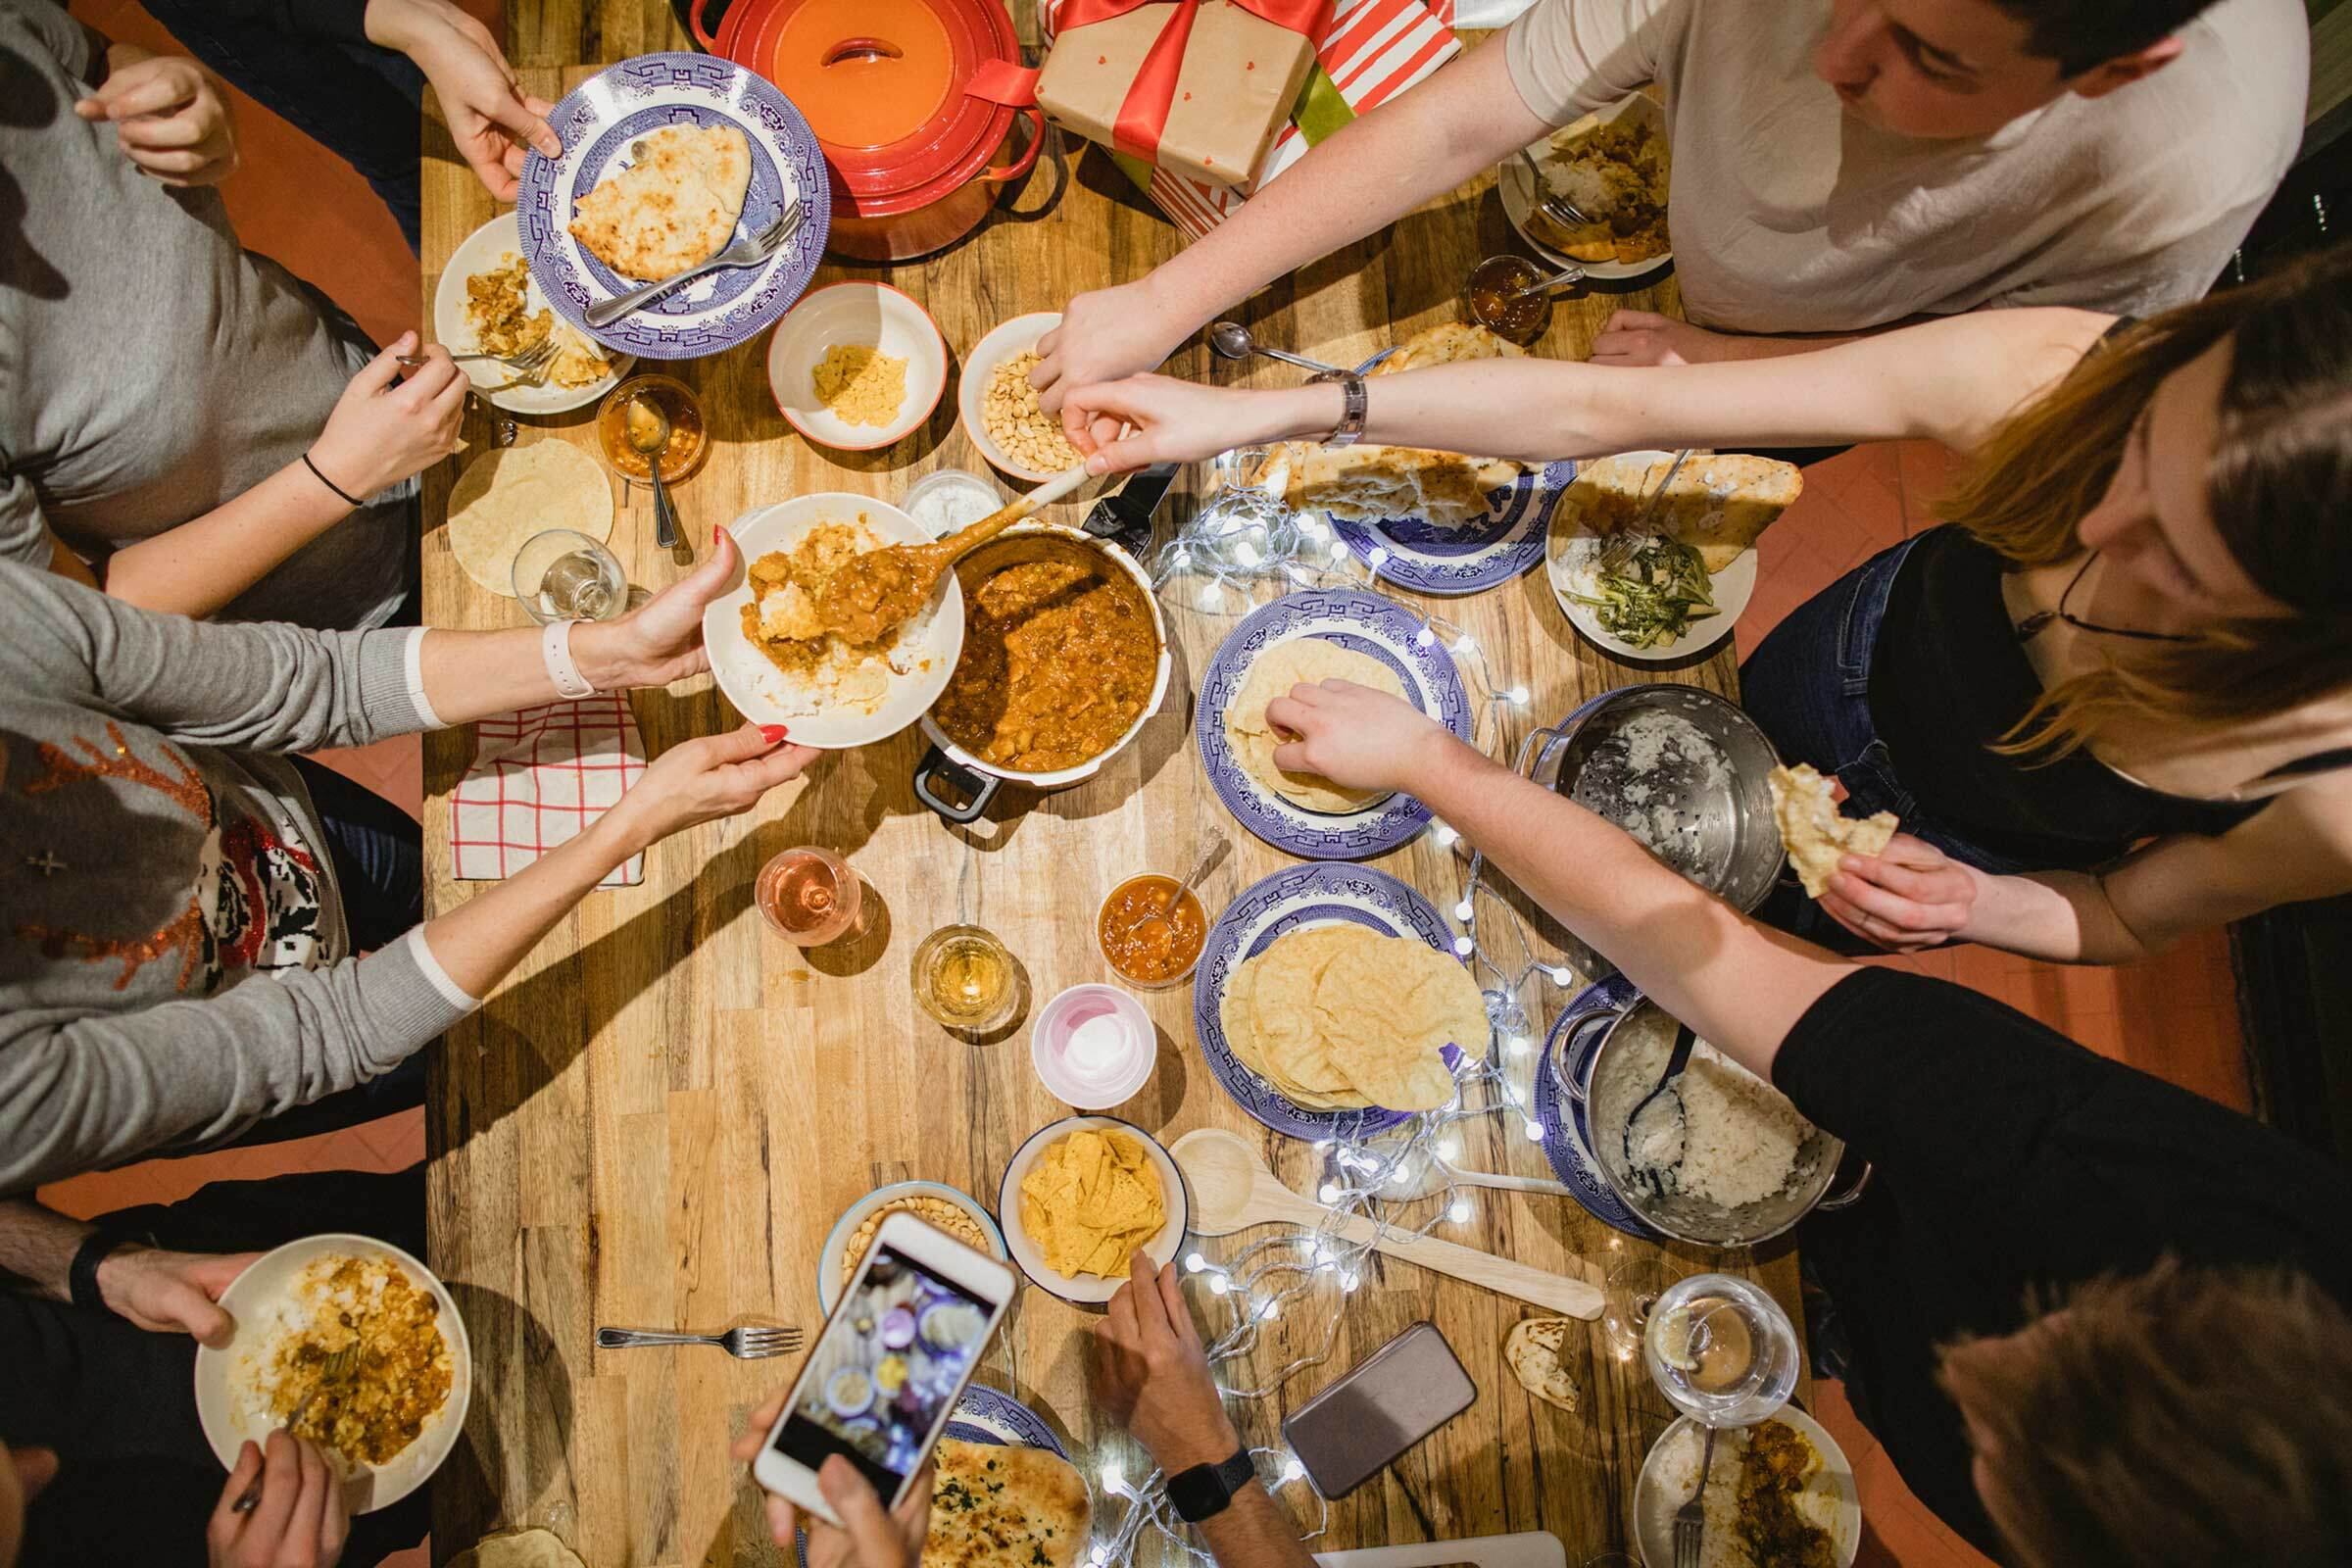 An over-head shot of a table filled with food and surrounded by hungry family members.